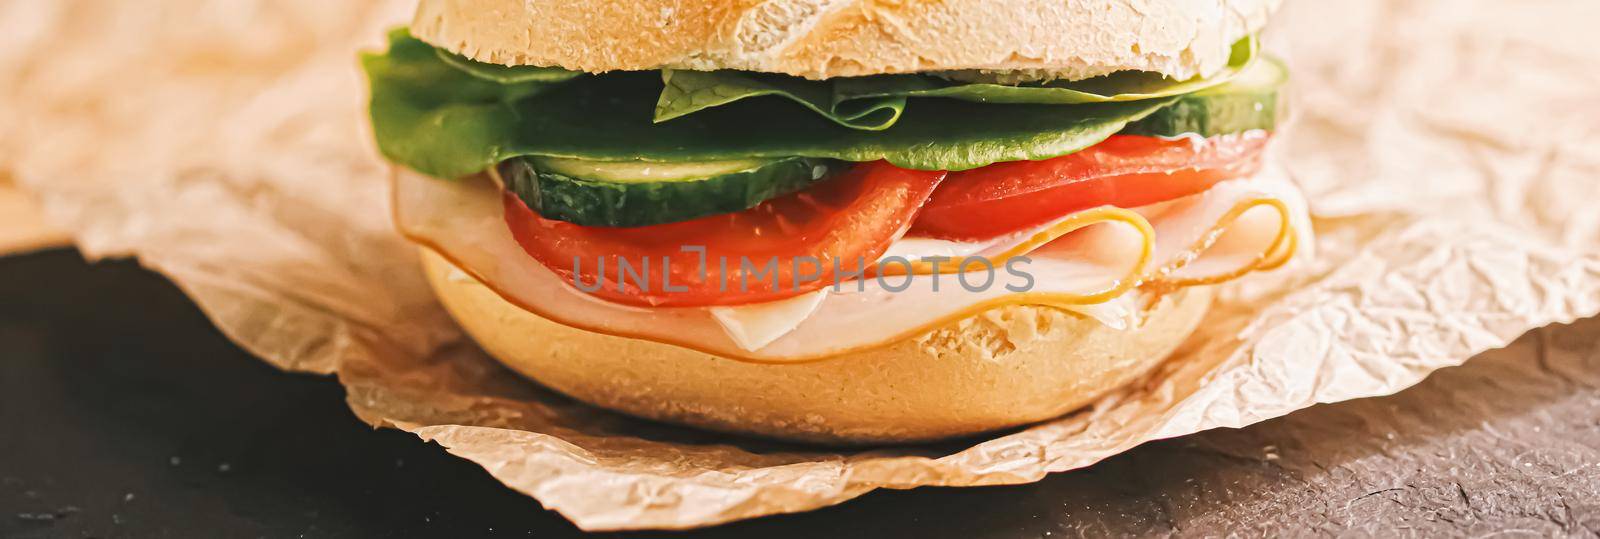 Sandwich with ham, cheese and fresh greens, take out comfort food closeup